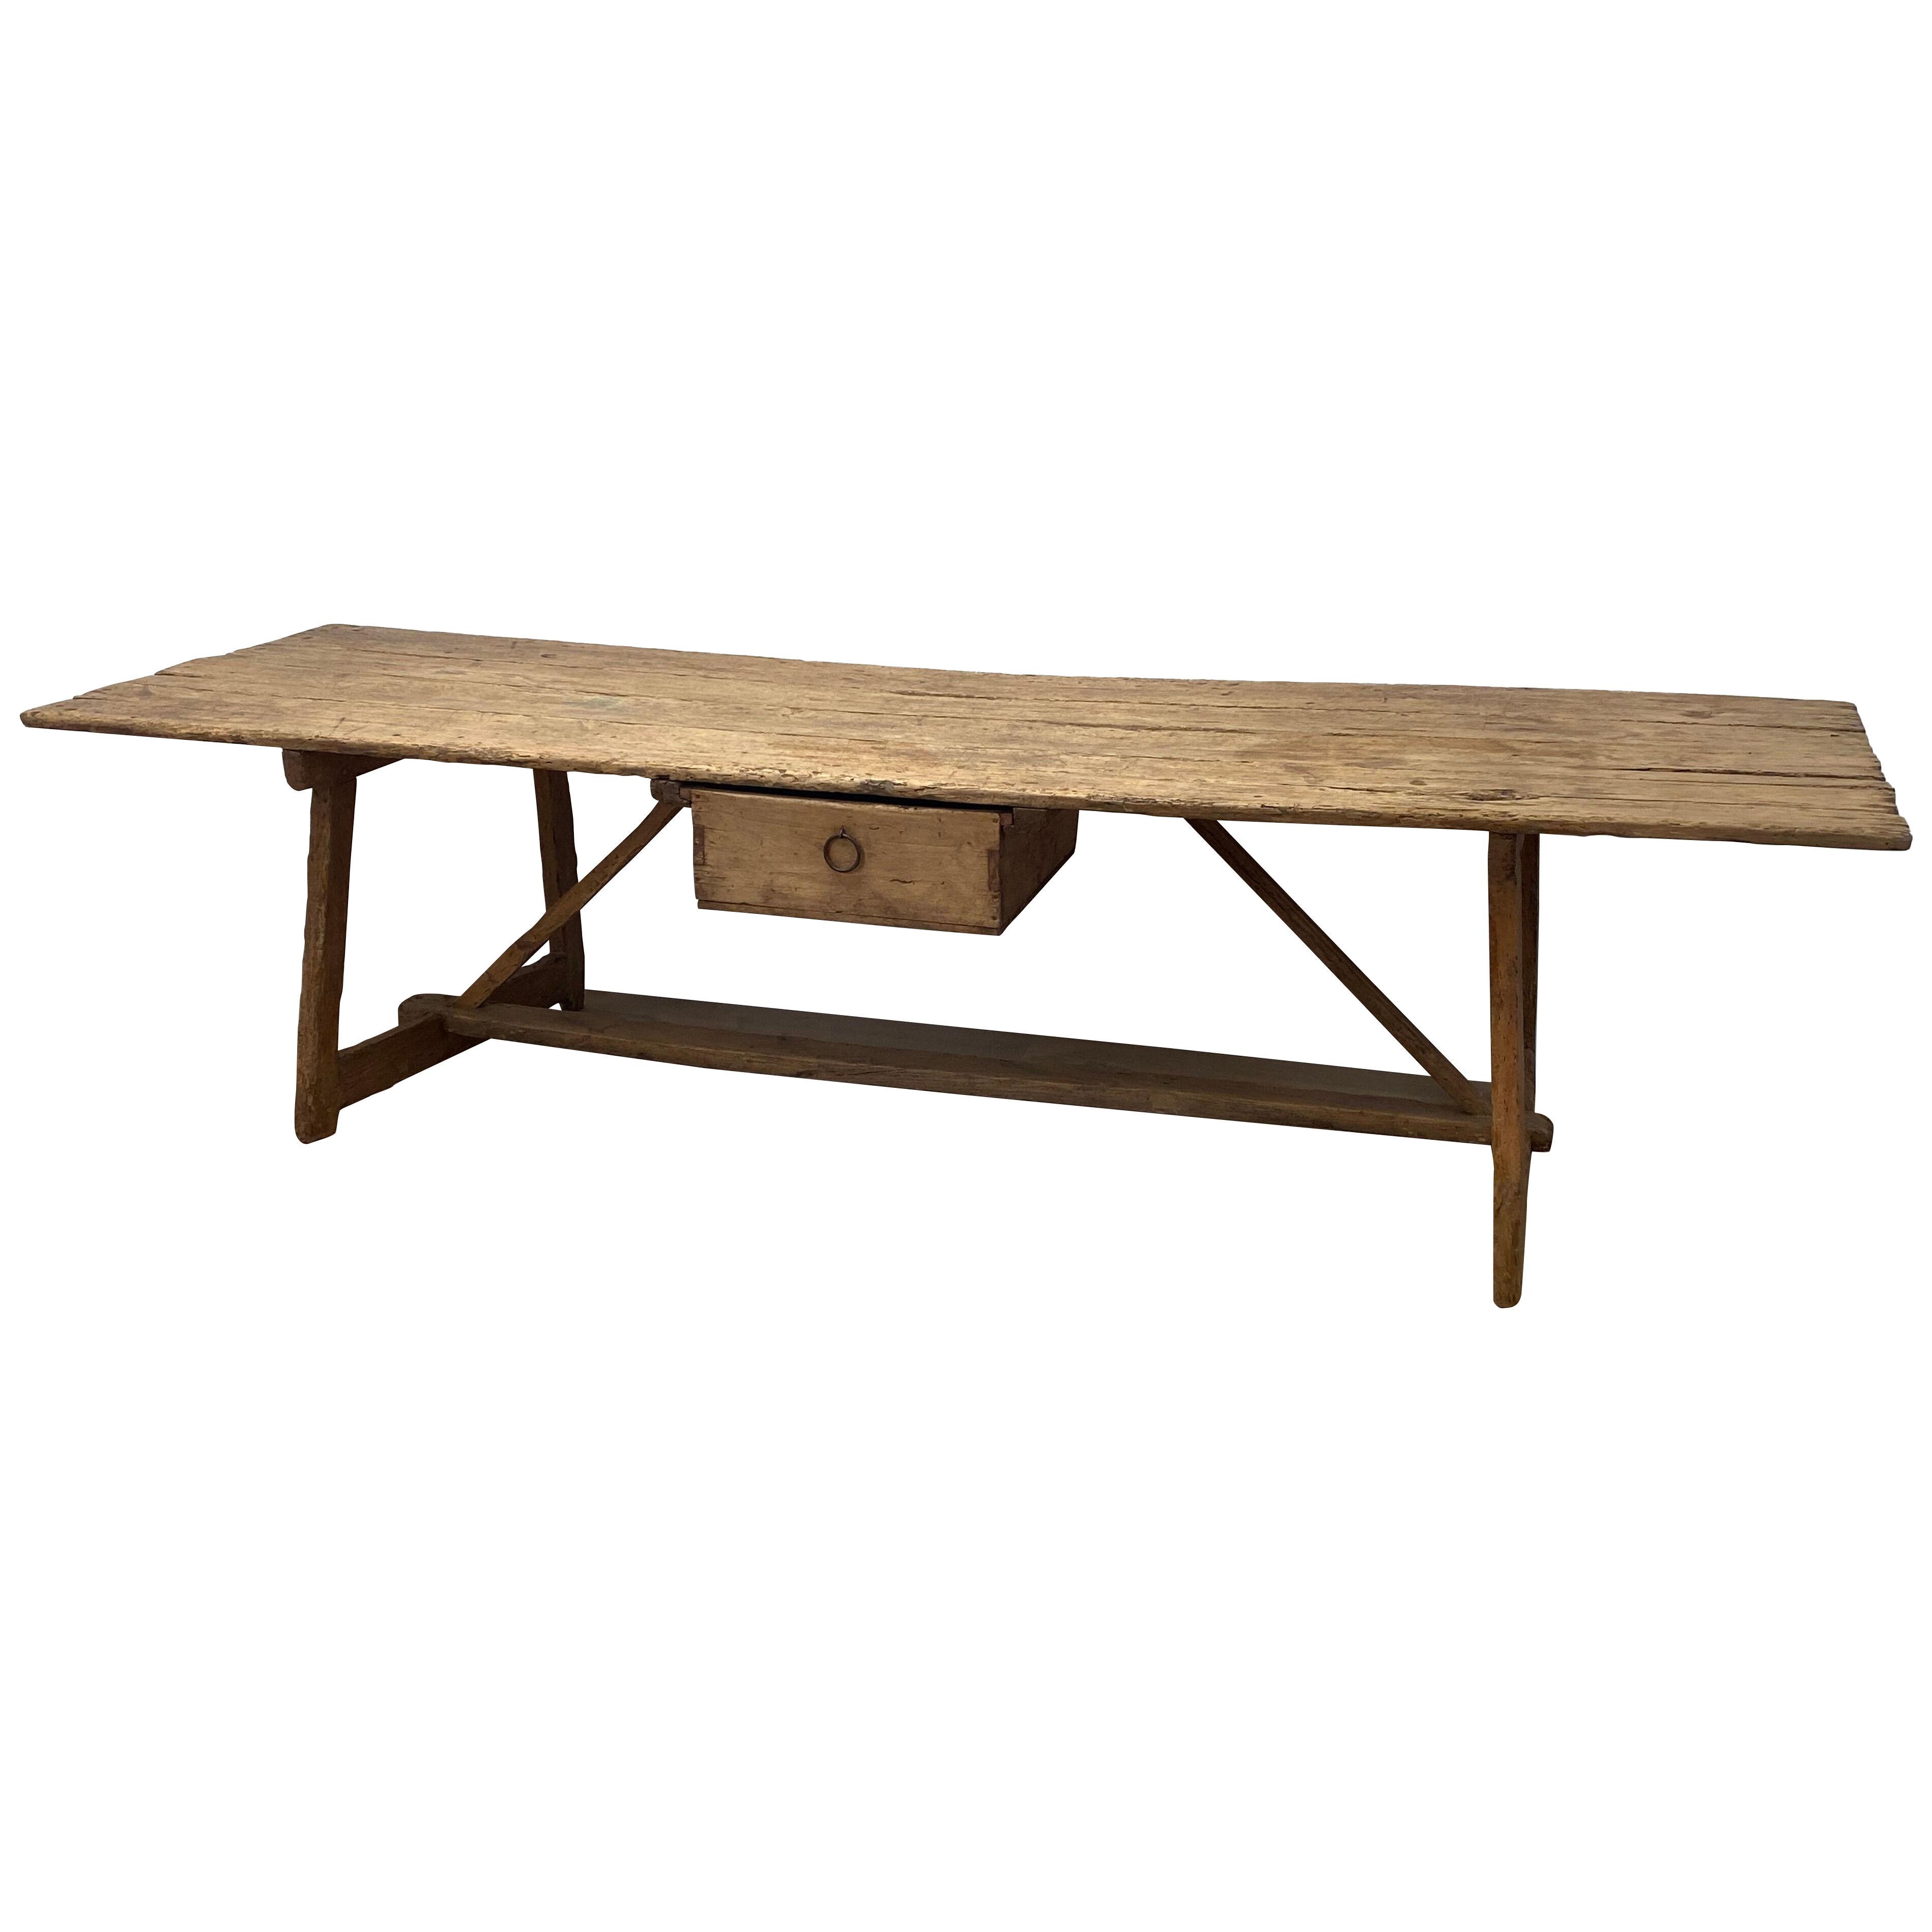 Rustic,Brutalist and Antique Spanish Table in a Bleached Chestnut Wood